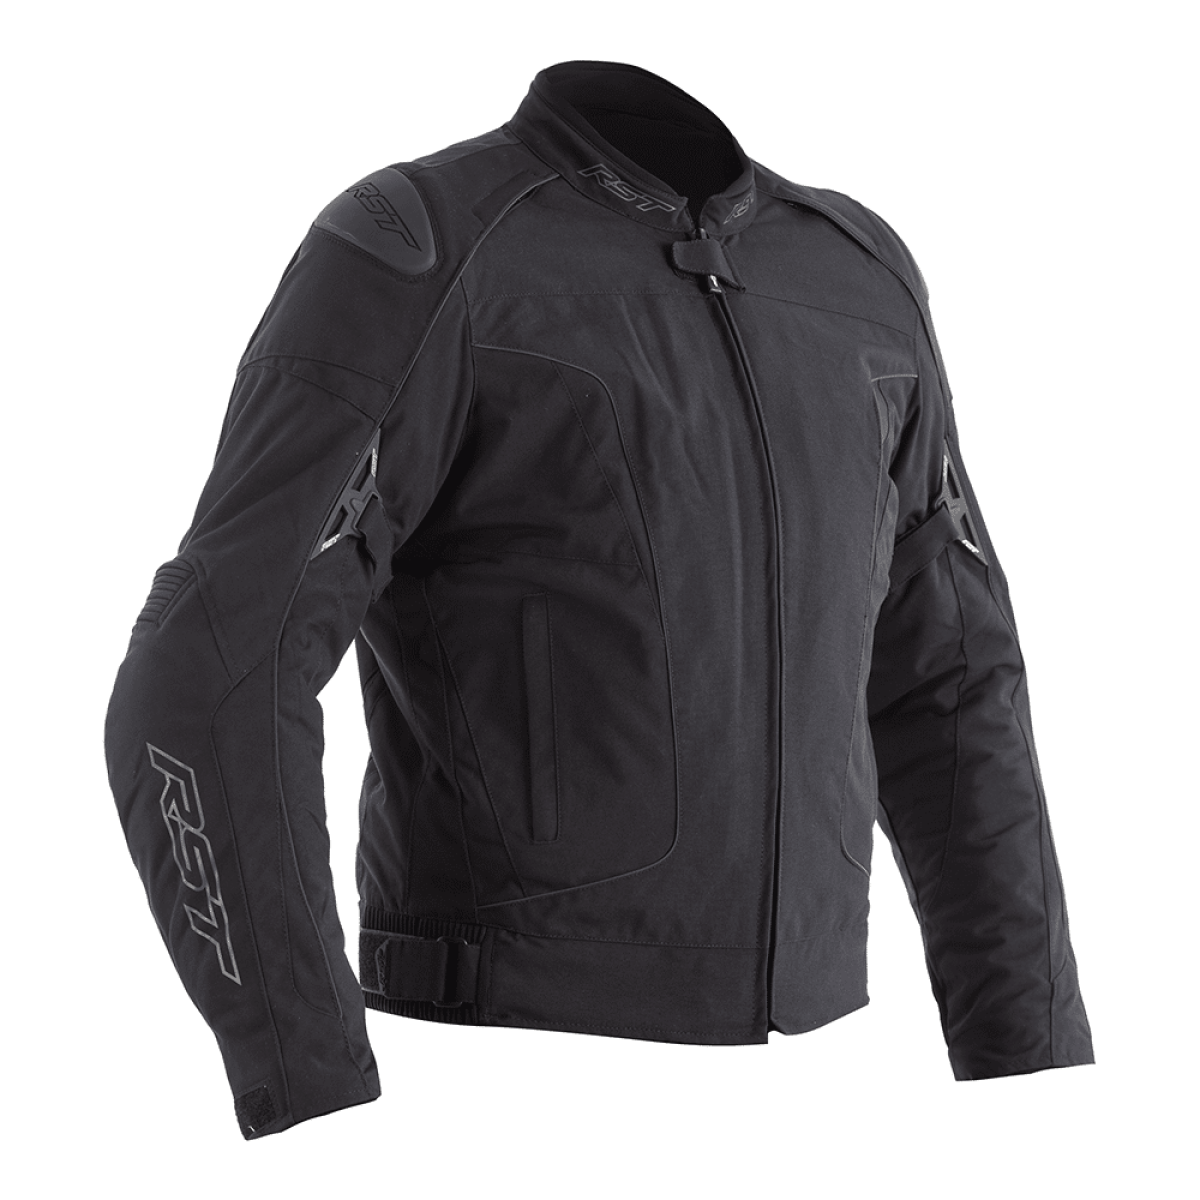 GT AIRBAG TEXTILE JACKET In&motion